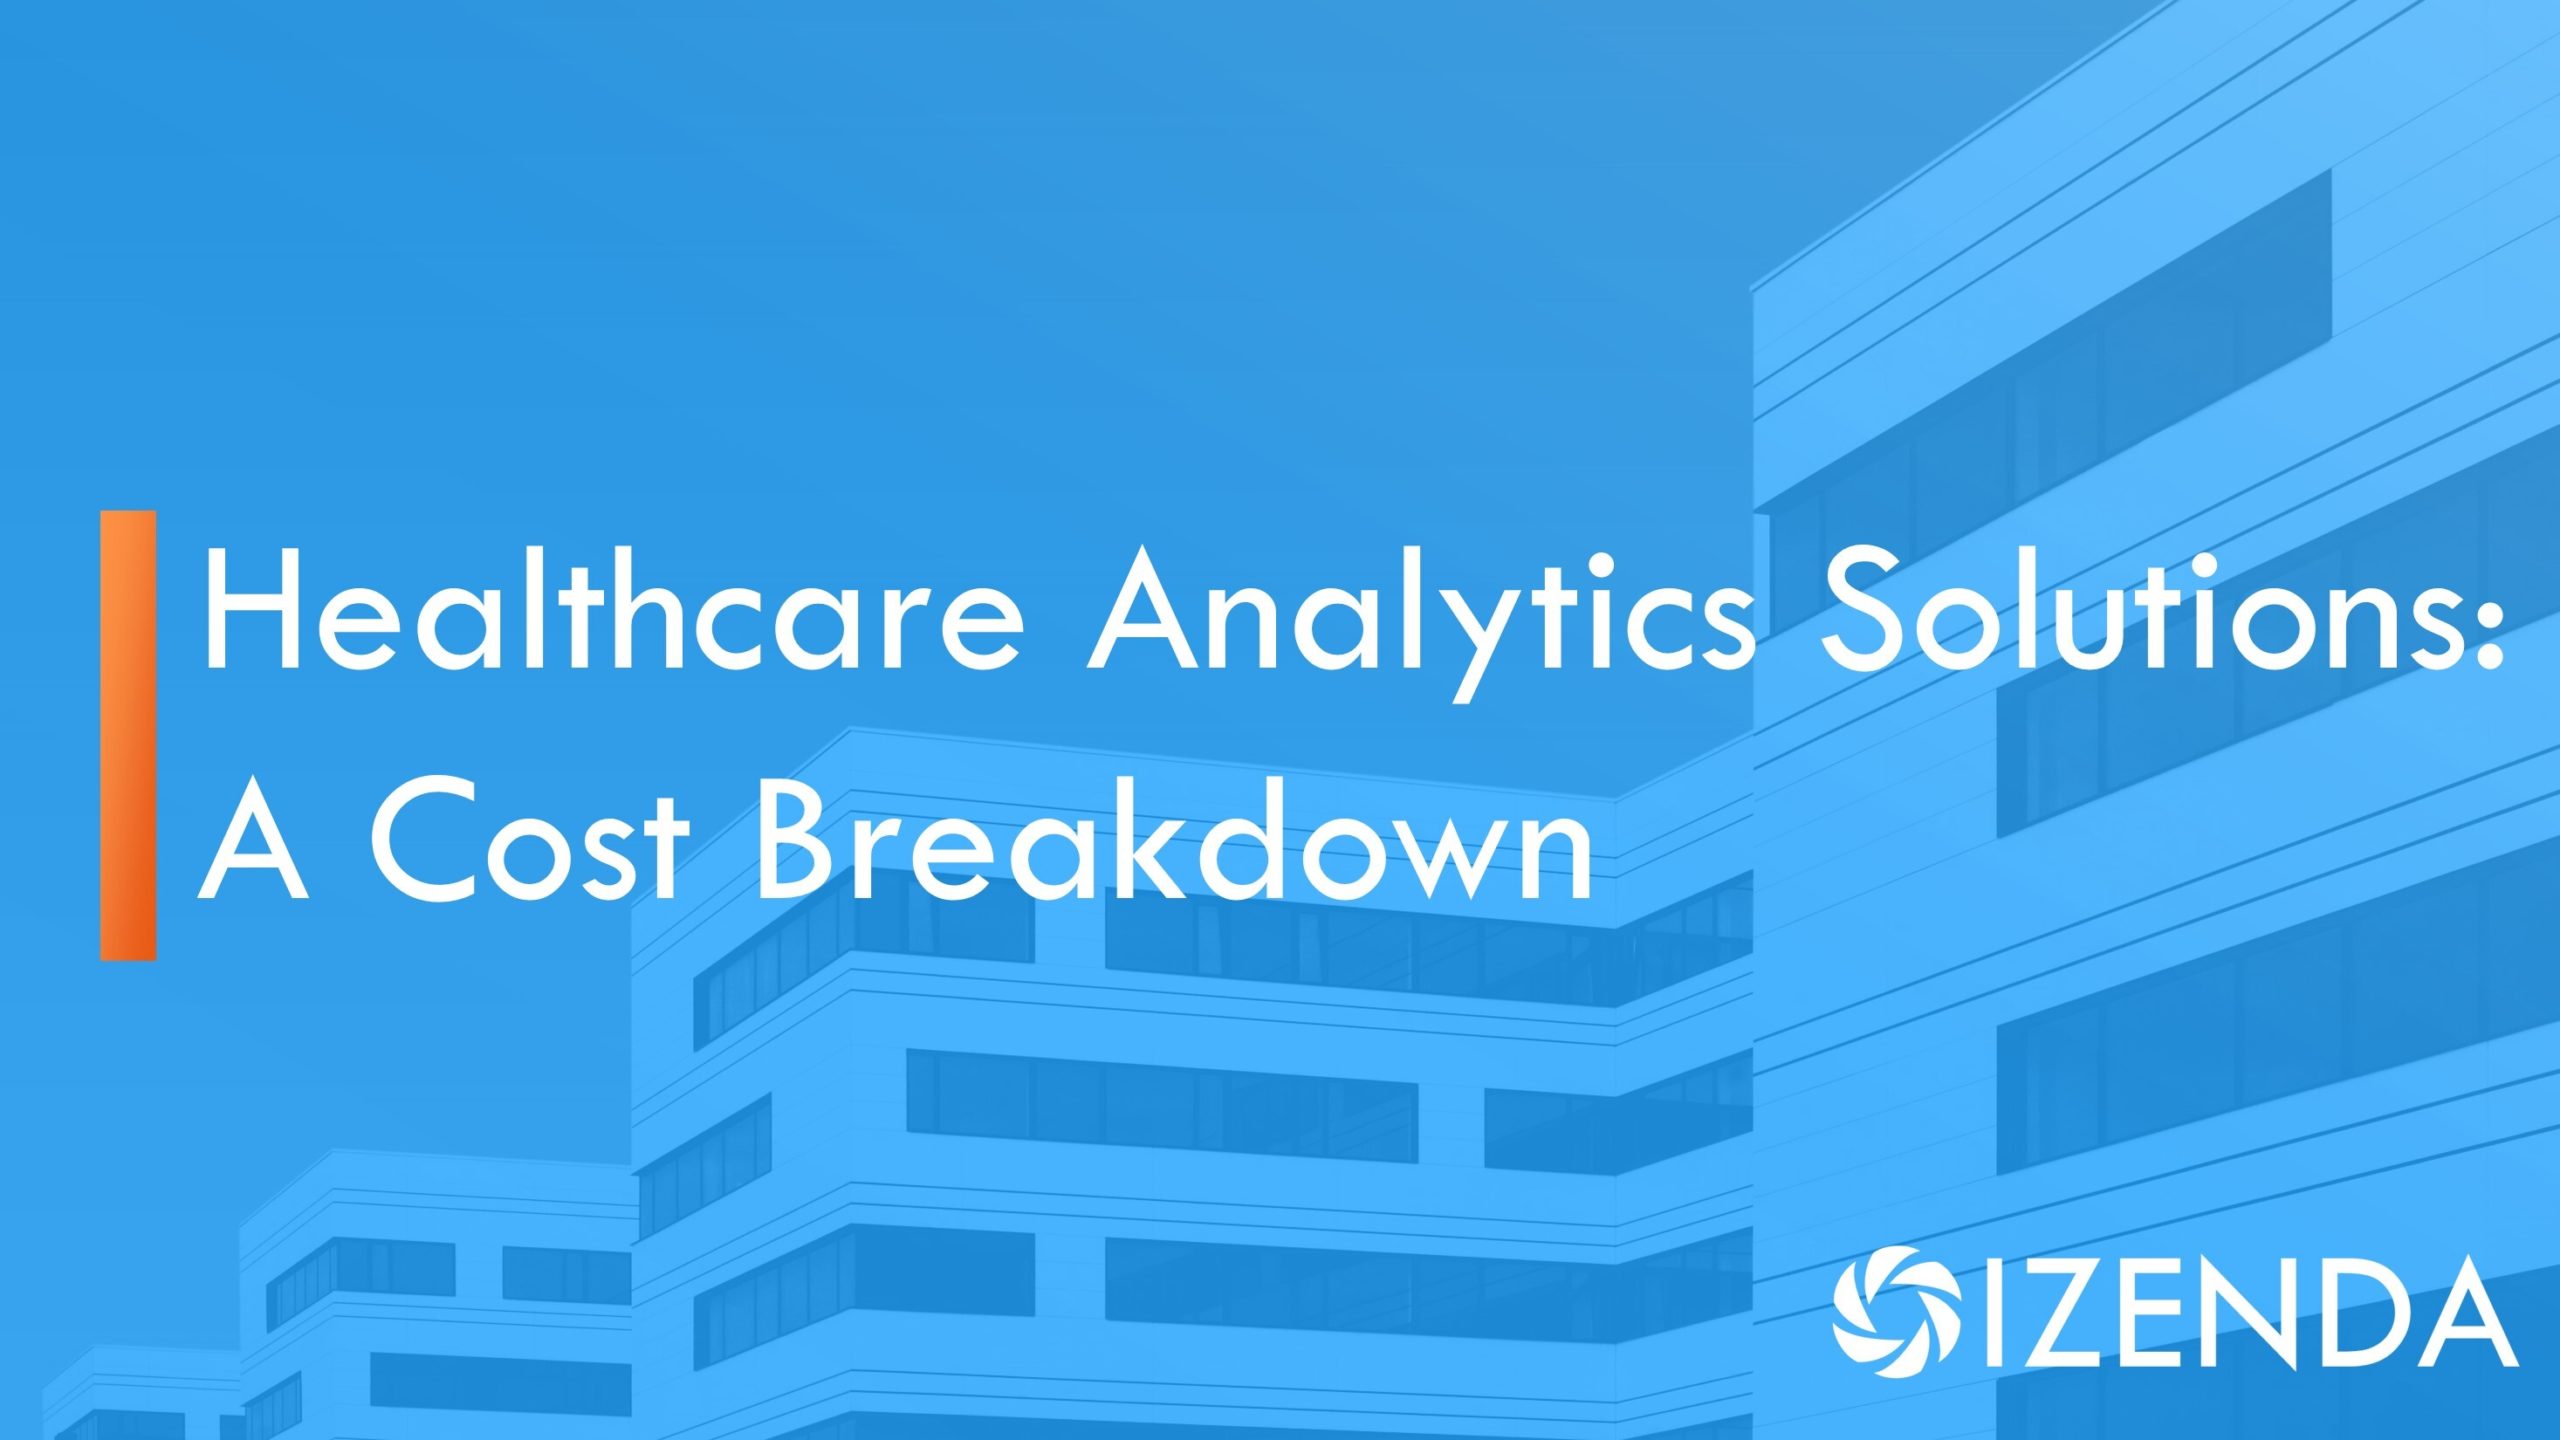 a cost breakdown of healthcare analytics solutions